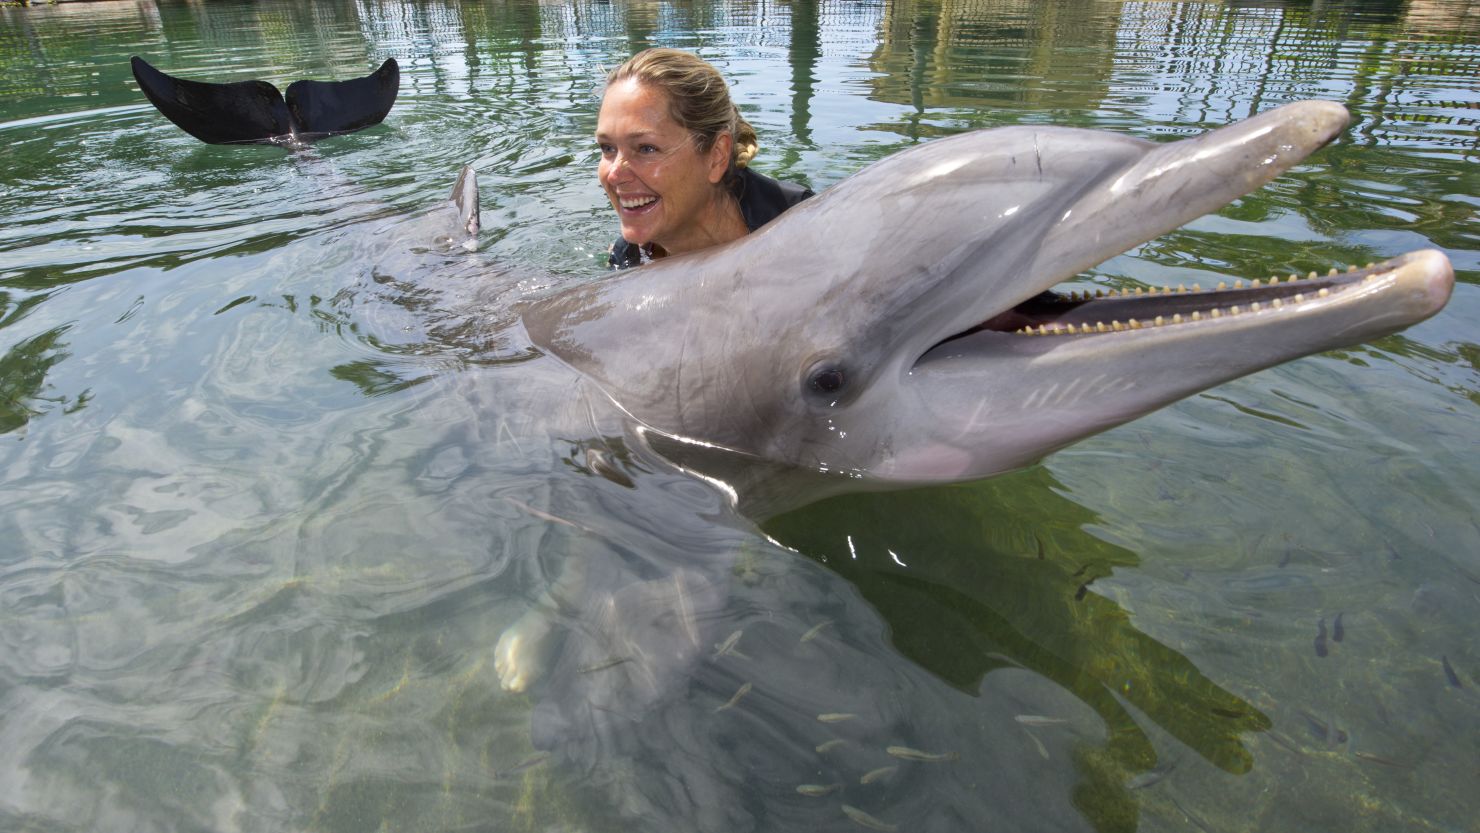 Swimming with dolphins has been one of the attractions at Honolulu's Kahala Hotel.